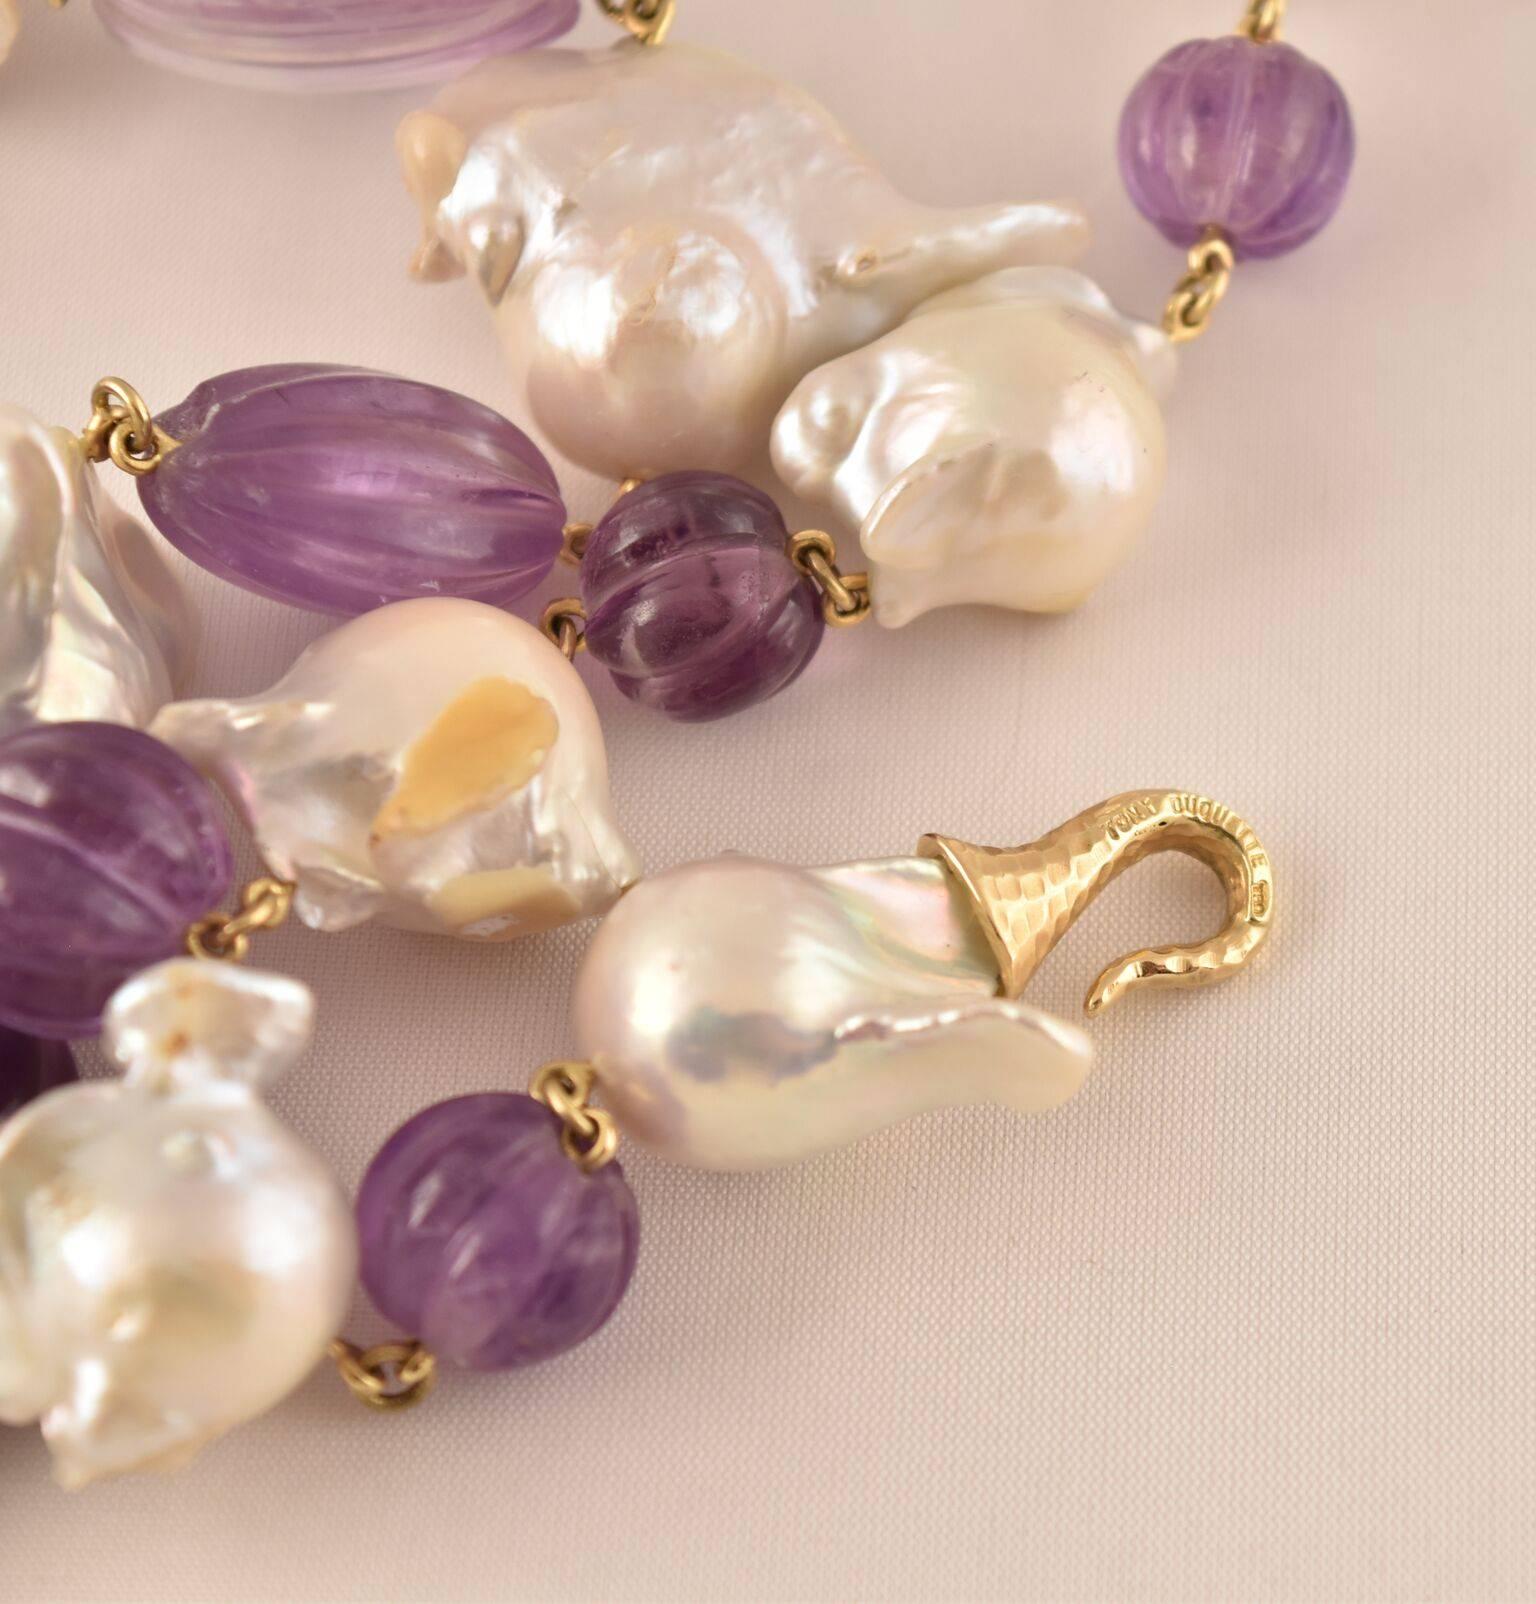 Beautiful Fluted Amethyst and Baroque Pearl Statement Necklace held by an 18k yellow gold clasp, by Tony Duquette, Designer Extraordinaire! Fluted Amethyst (app. 290ct.); approx. 24” long x .75-1” wide; Outstanding Piece of Timeless Beauty! 
